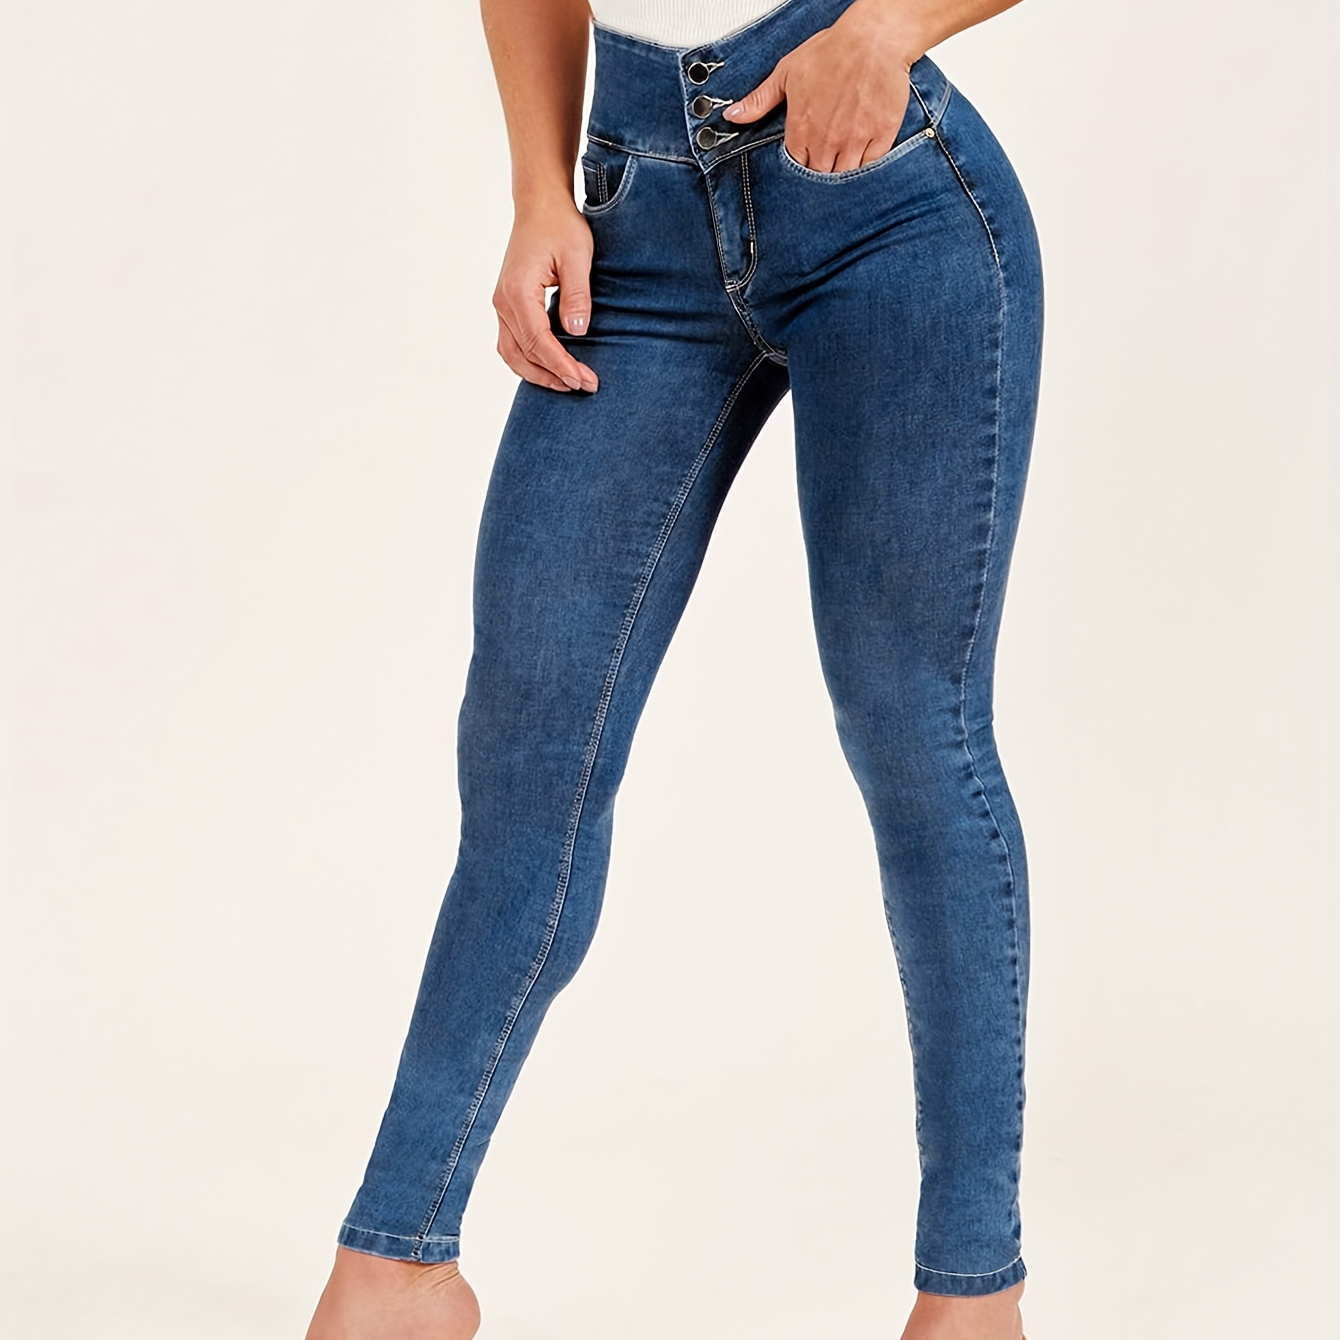 

Single-breasted High Waist Skinny Jeans, Multi-button Slash Pocket Sexy Solid Color Denim Pants, Women's Denim Jeans & Clothing